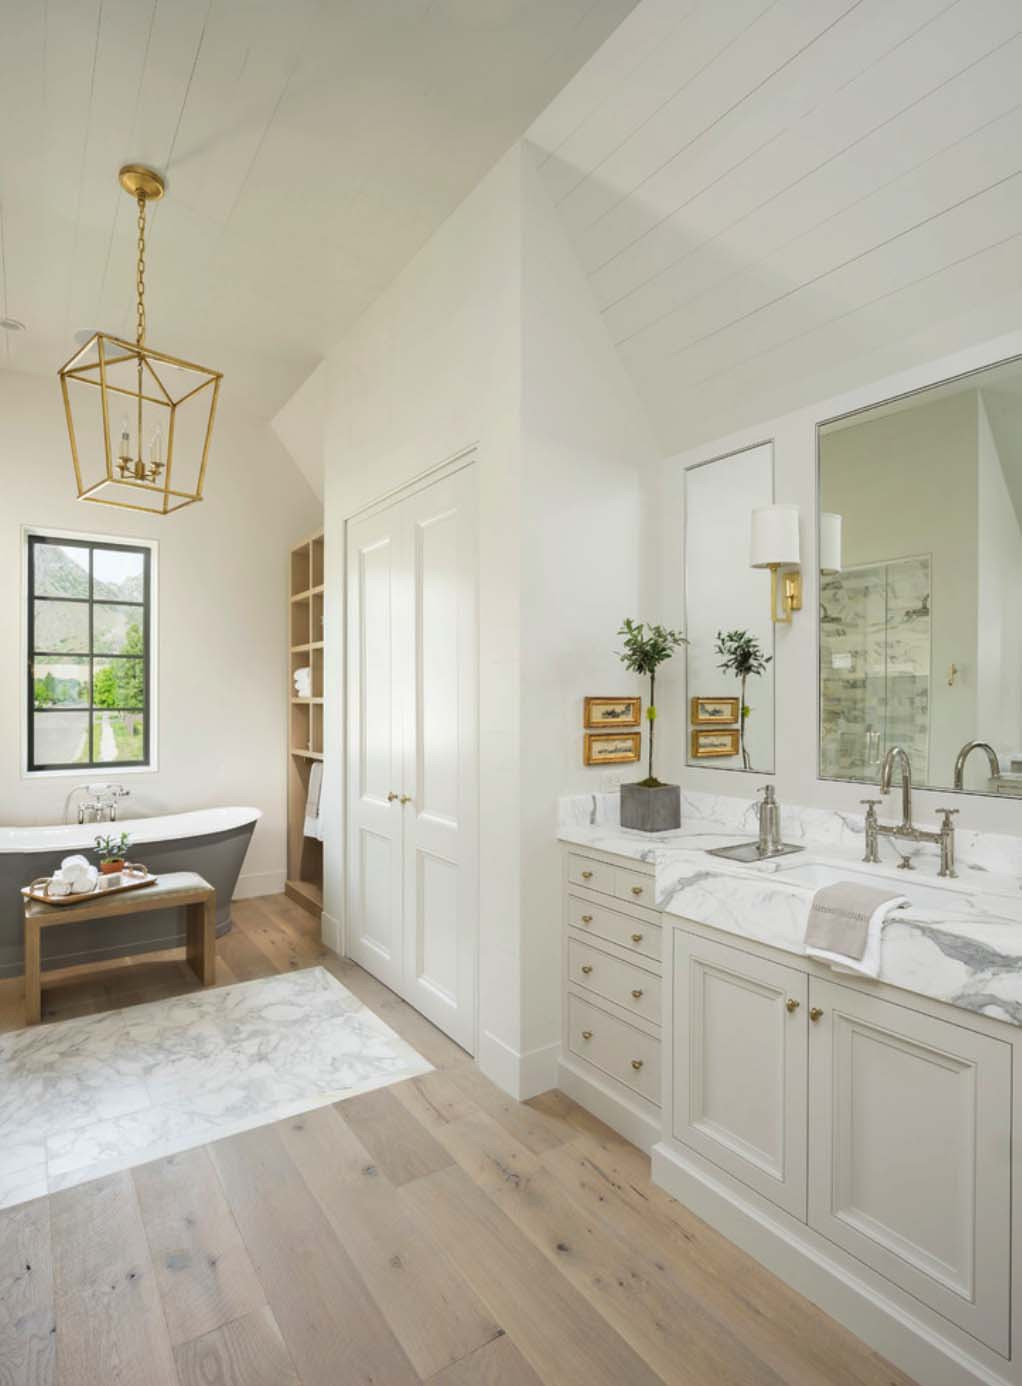 Timeless Bathroom Designs
 Timeless dream home in Utah showcases jaw dropping details